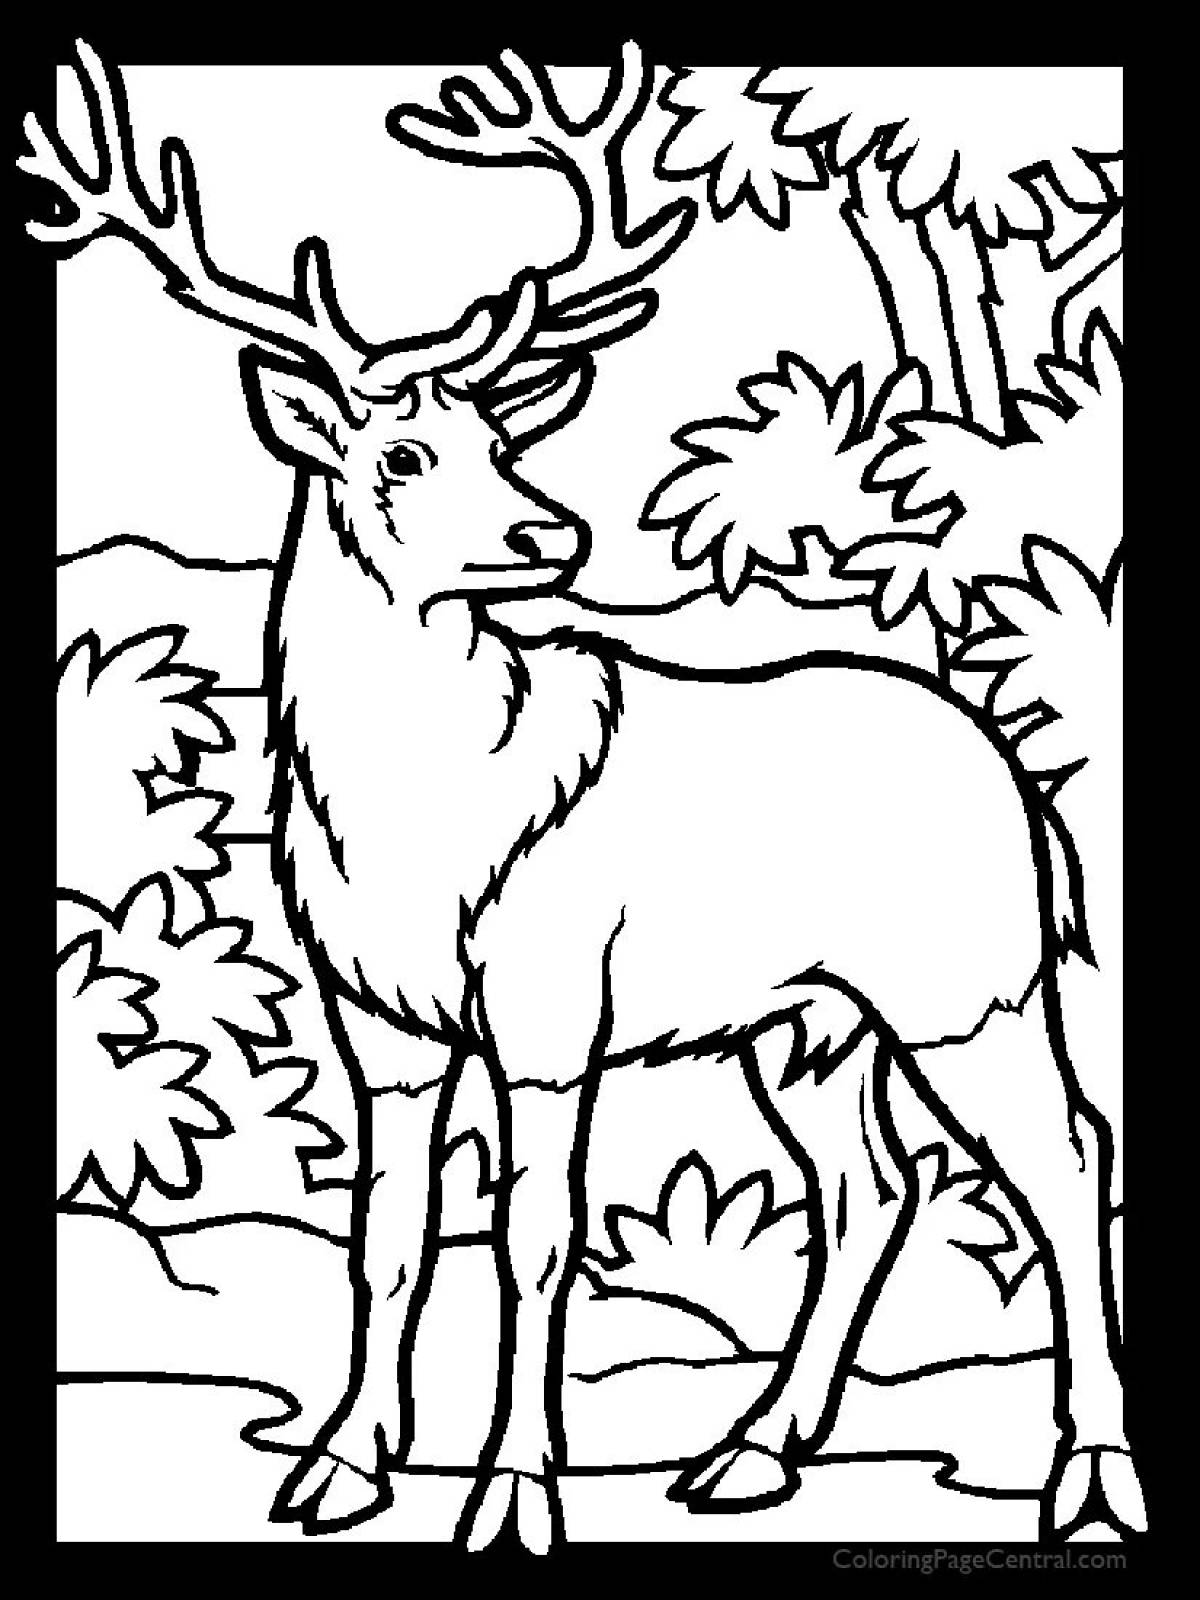 Deer in the forest #5